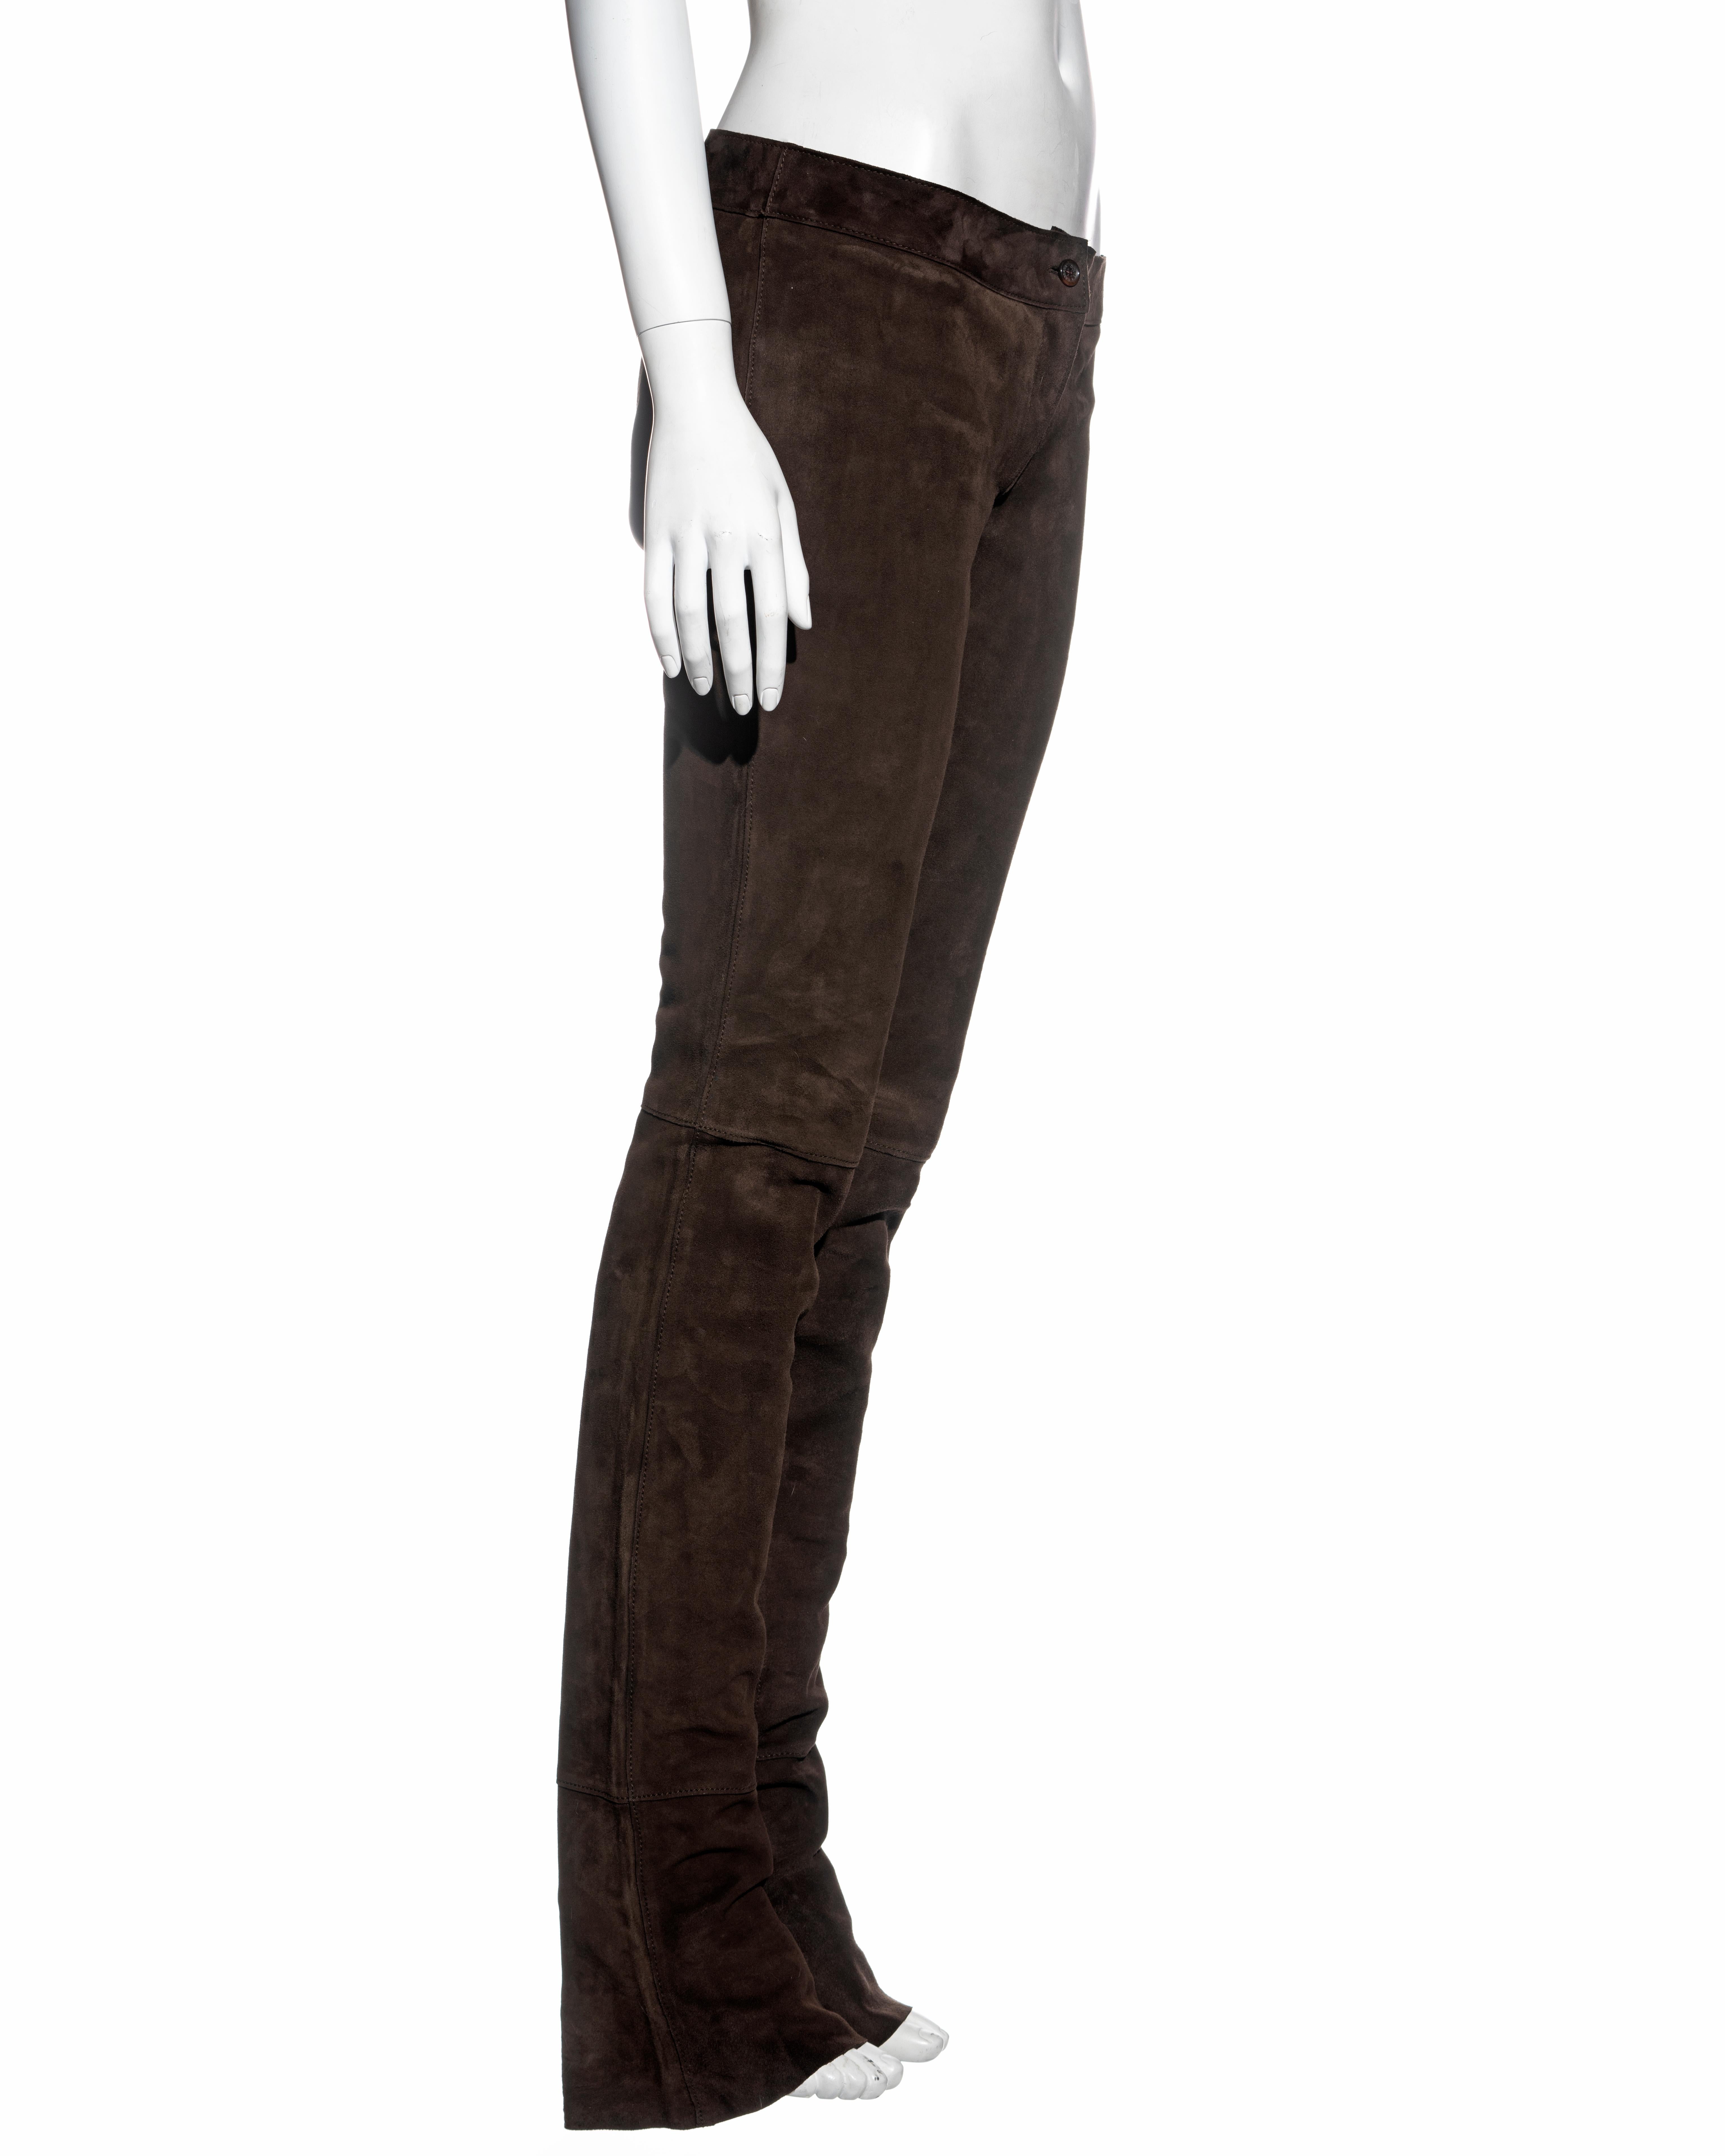 Dolce & Gabbana low rise extra long ruched brown leather pants, fw 2001 2